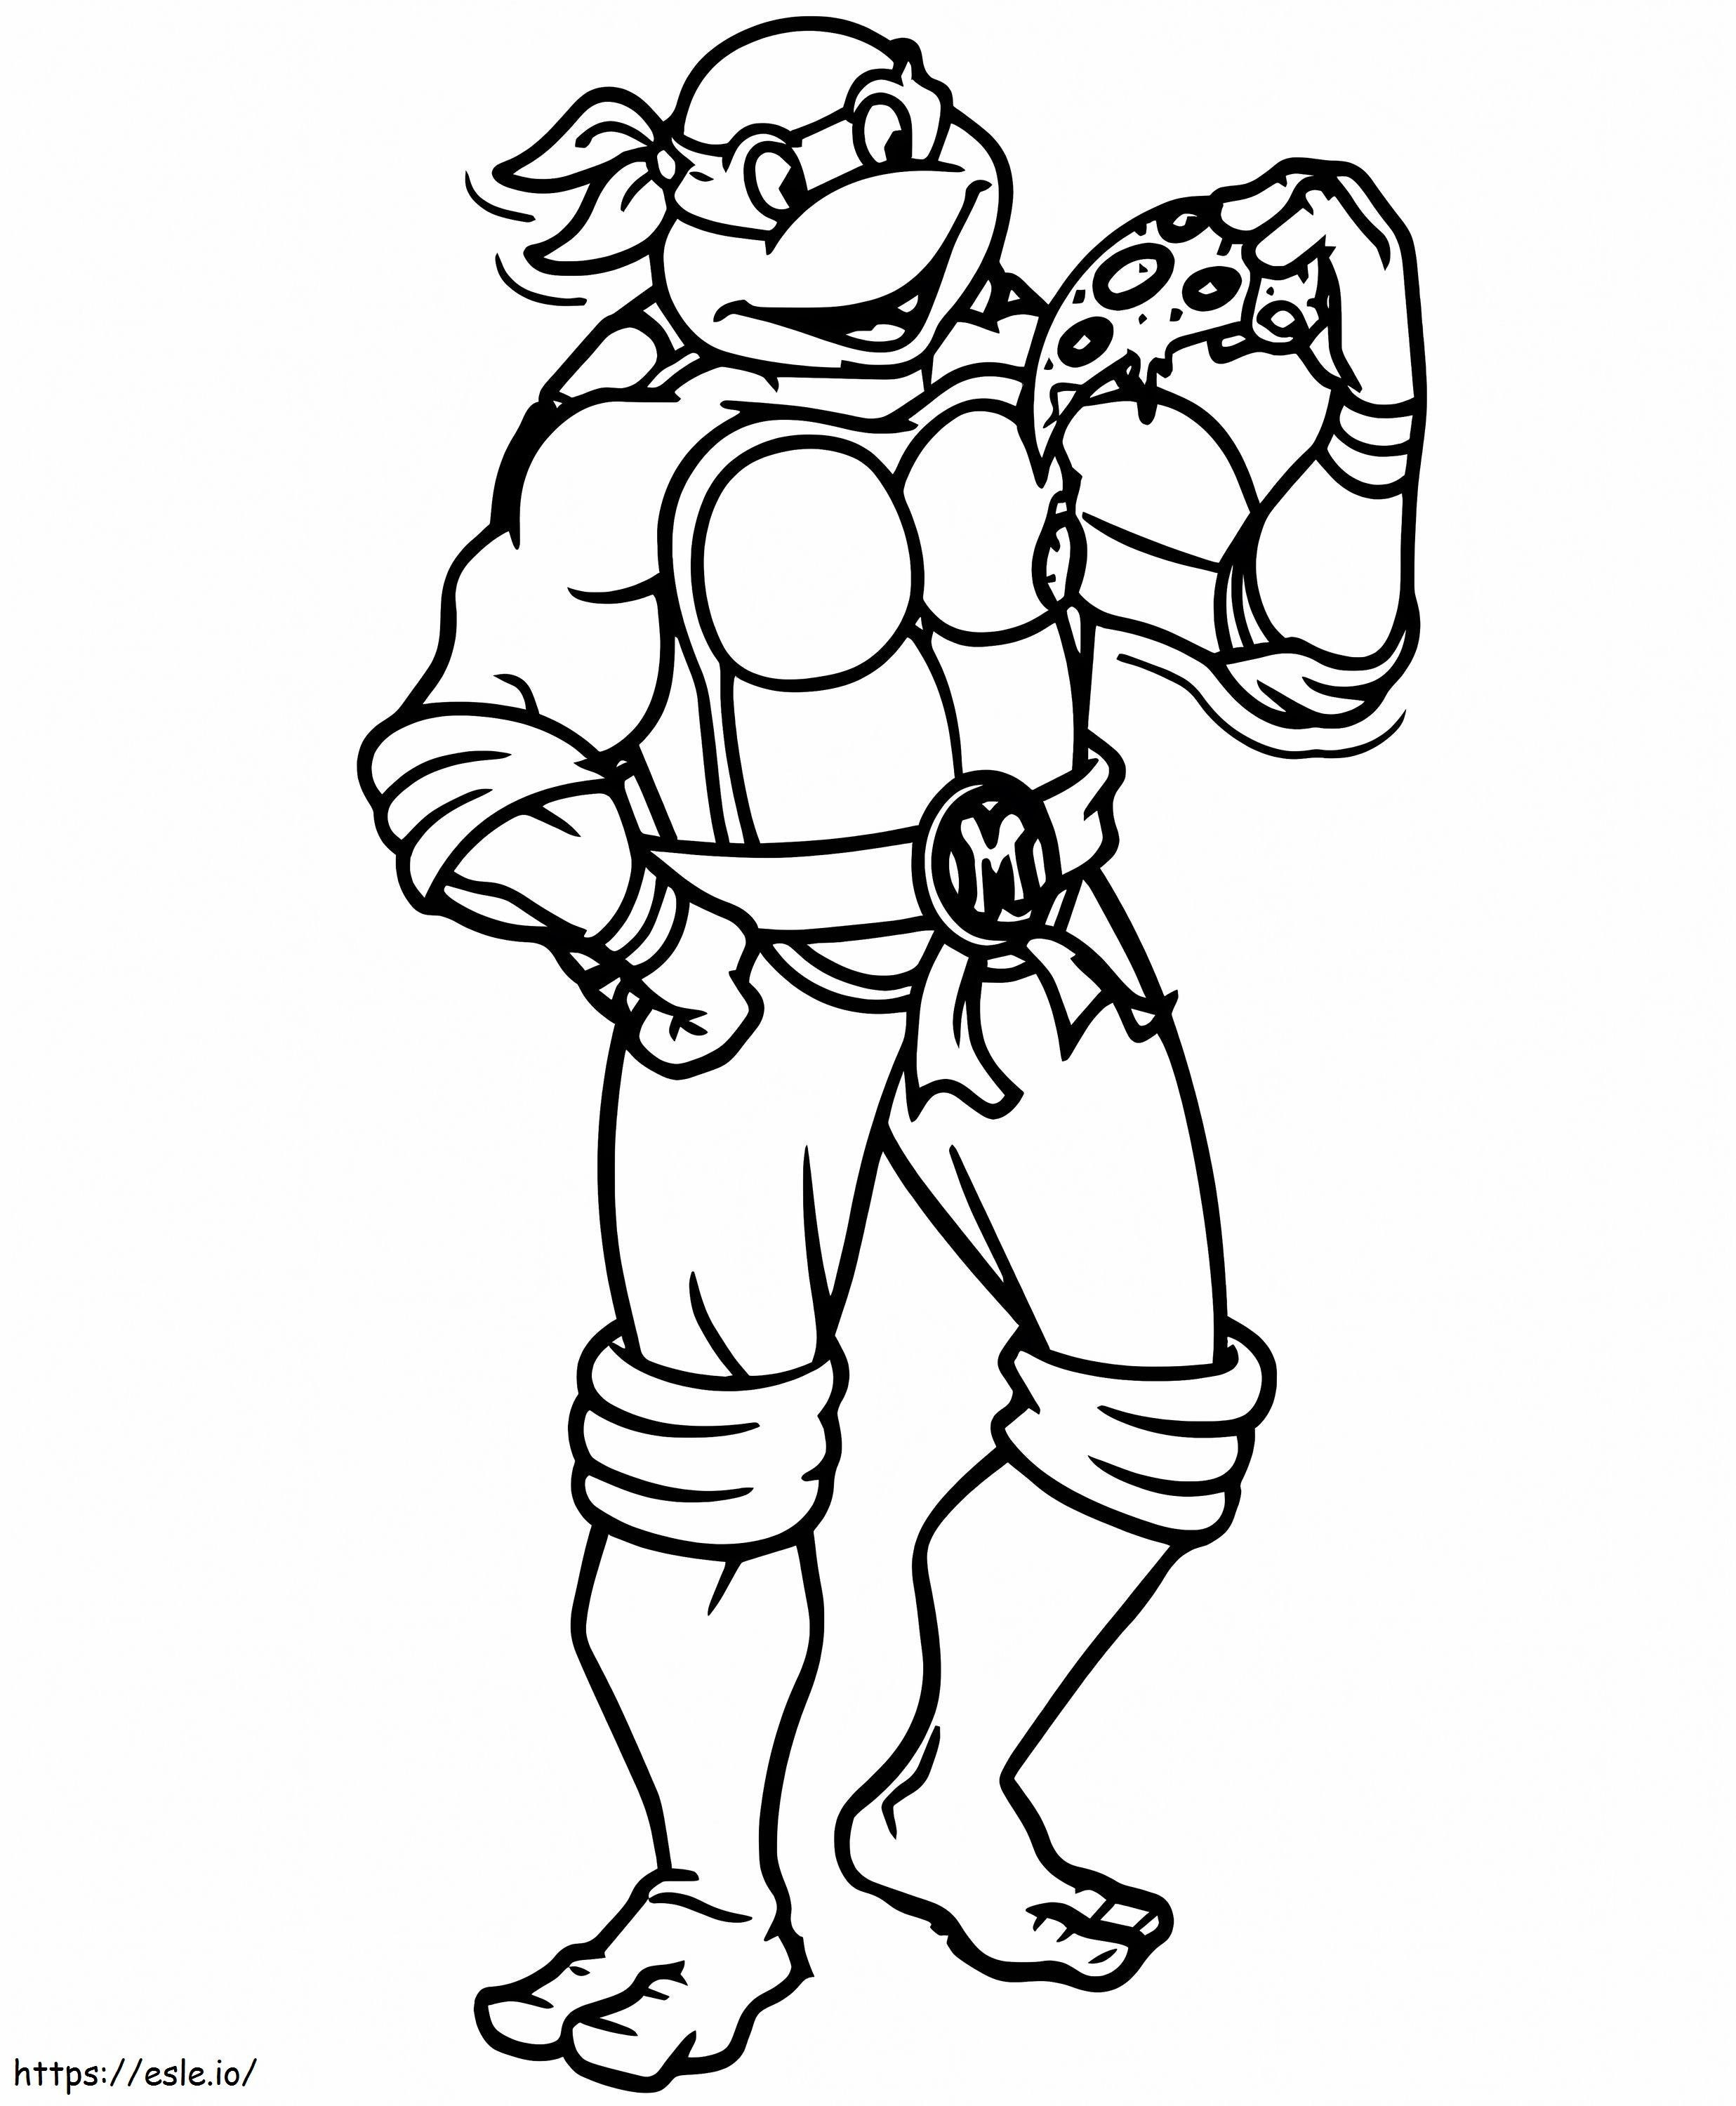 Michelangelo Eating Pizza 2 coloring page